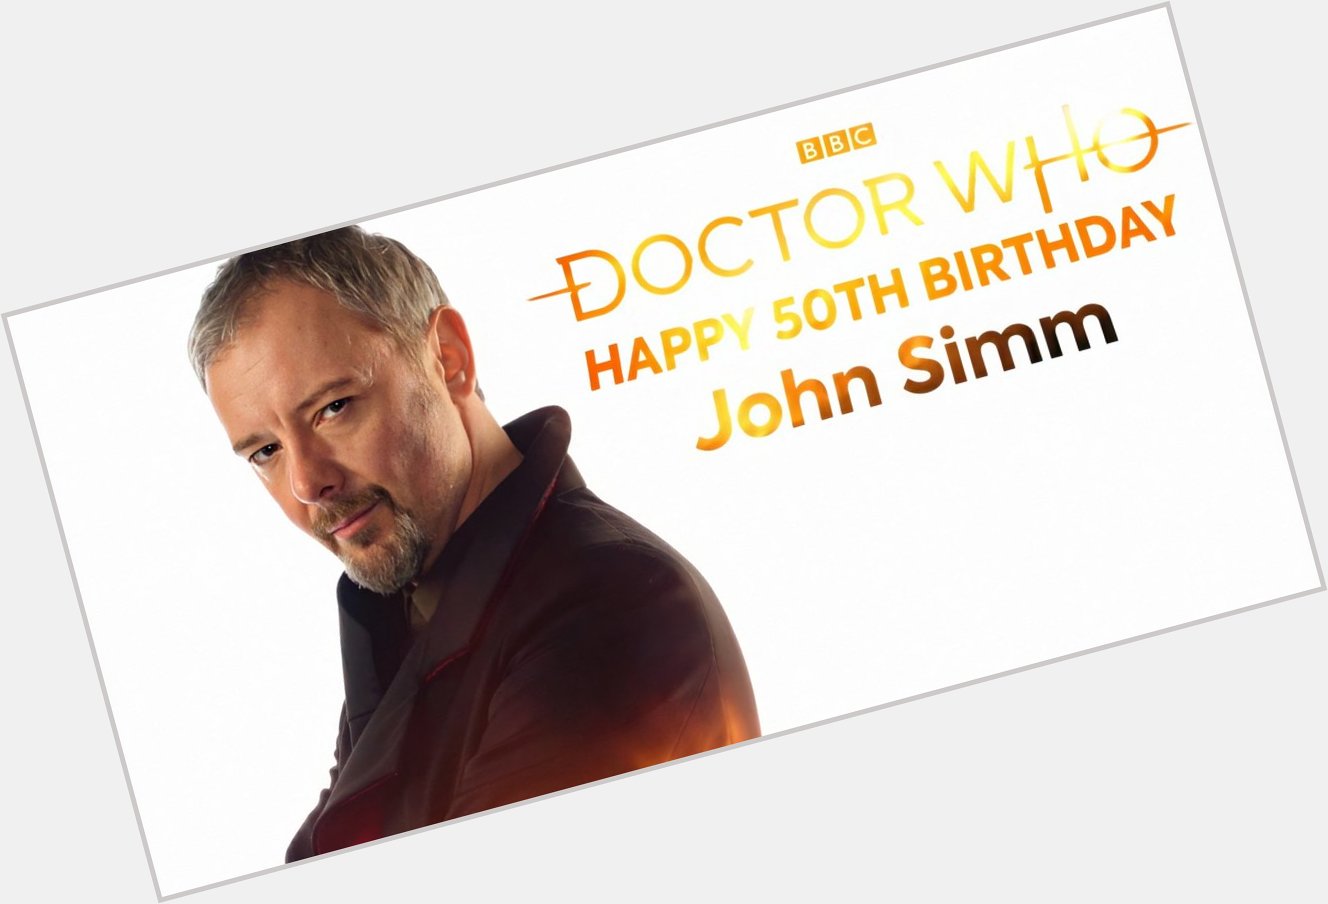 Happy Birthday John Simm He was my first proper Master I watched and grew up watching on-screen! 